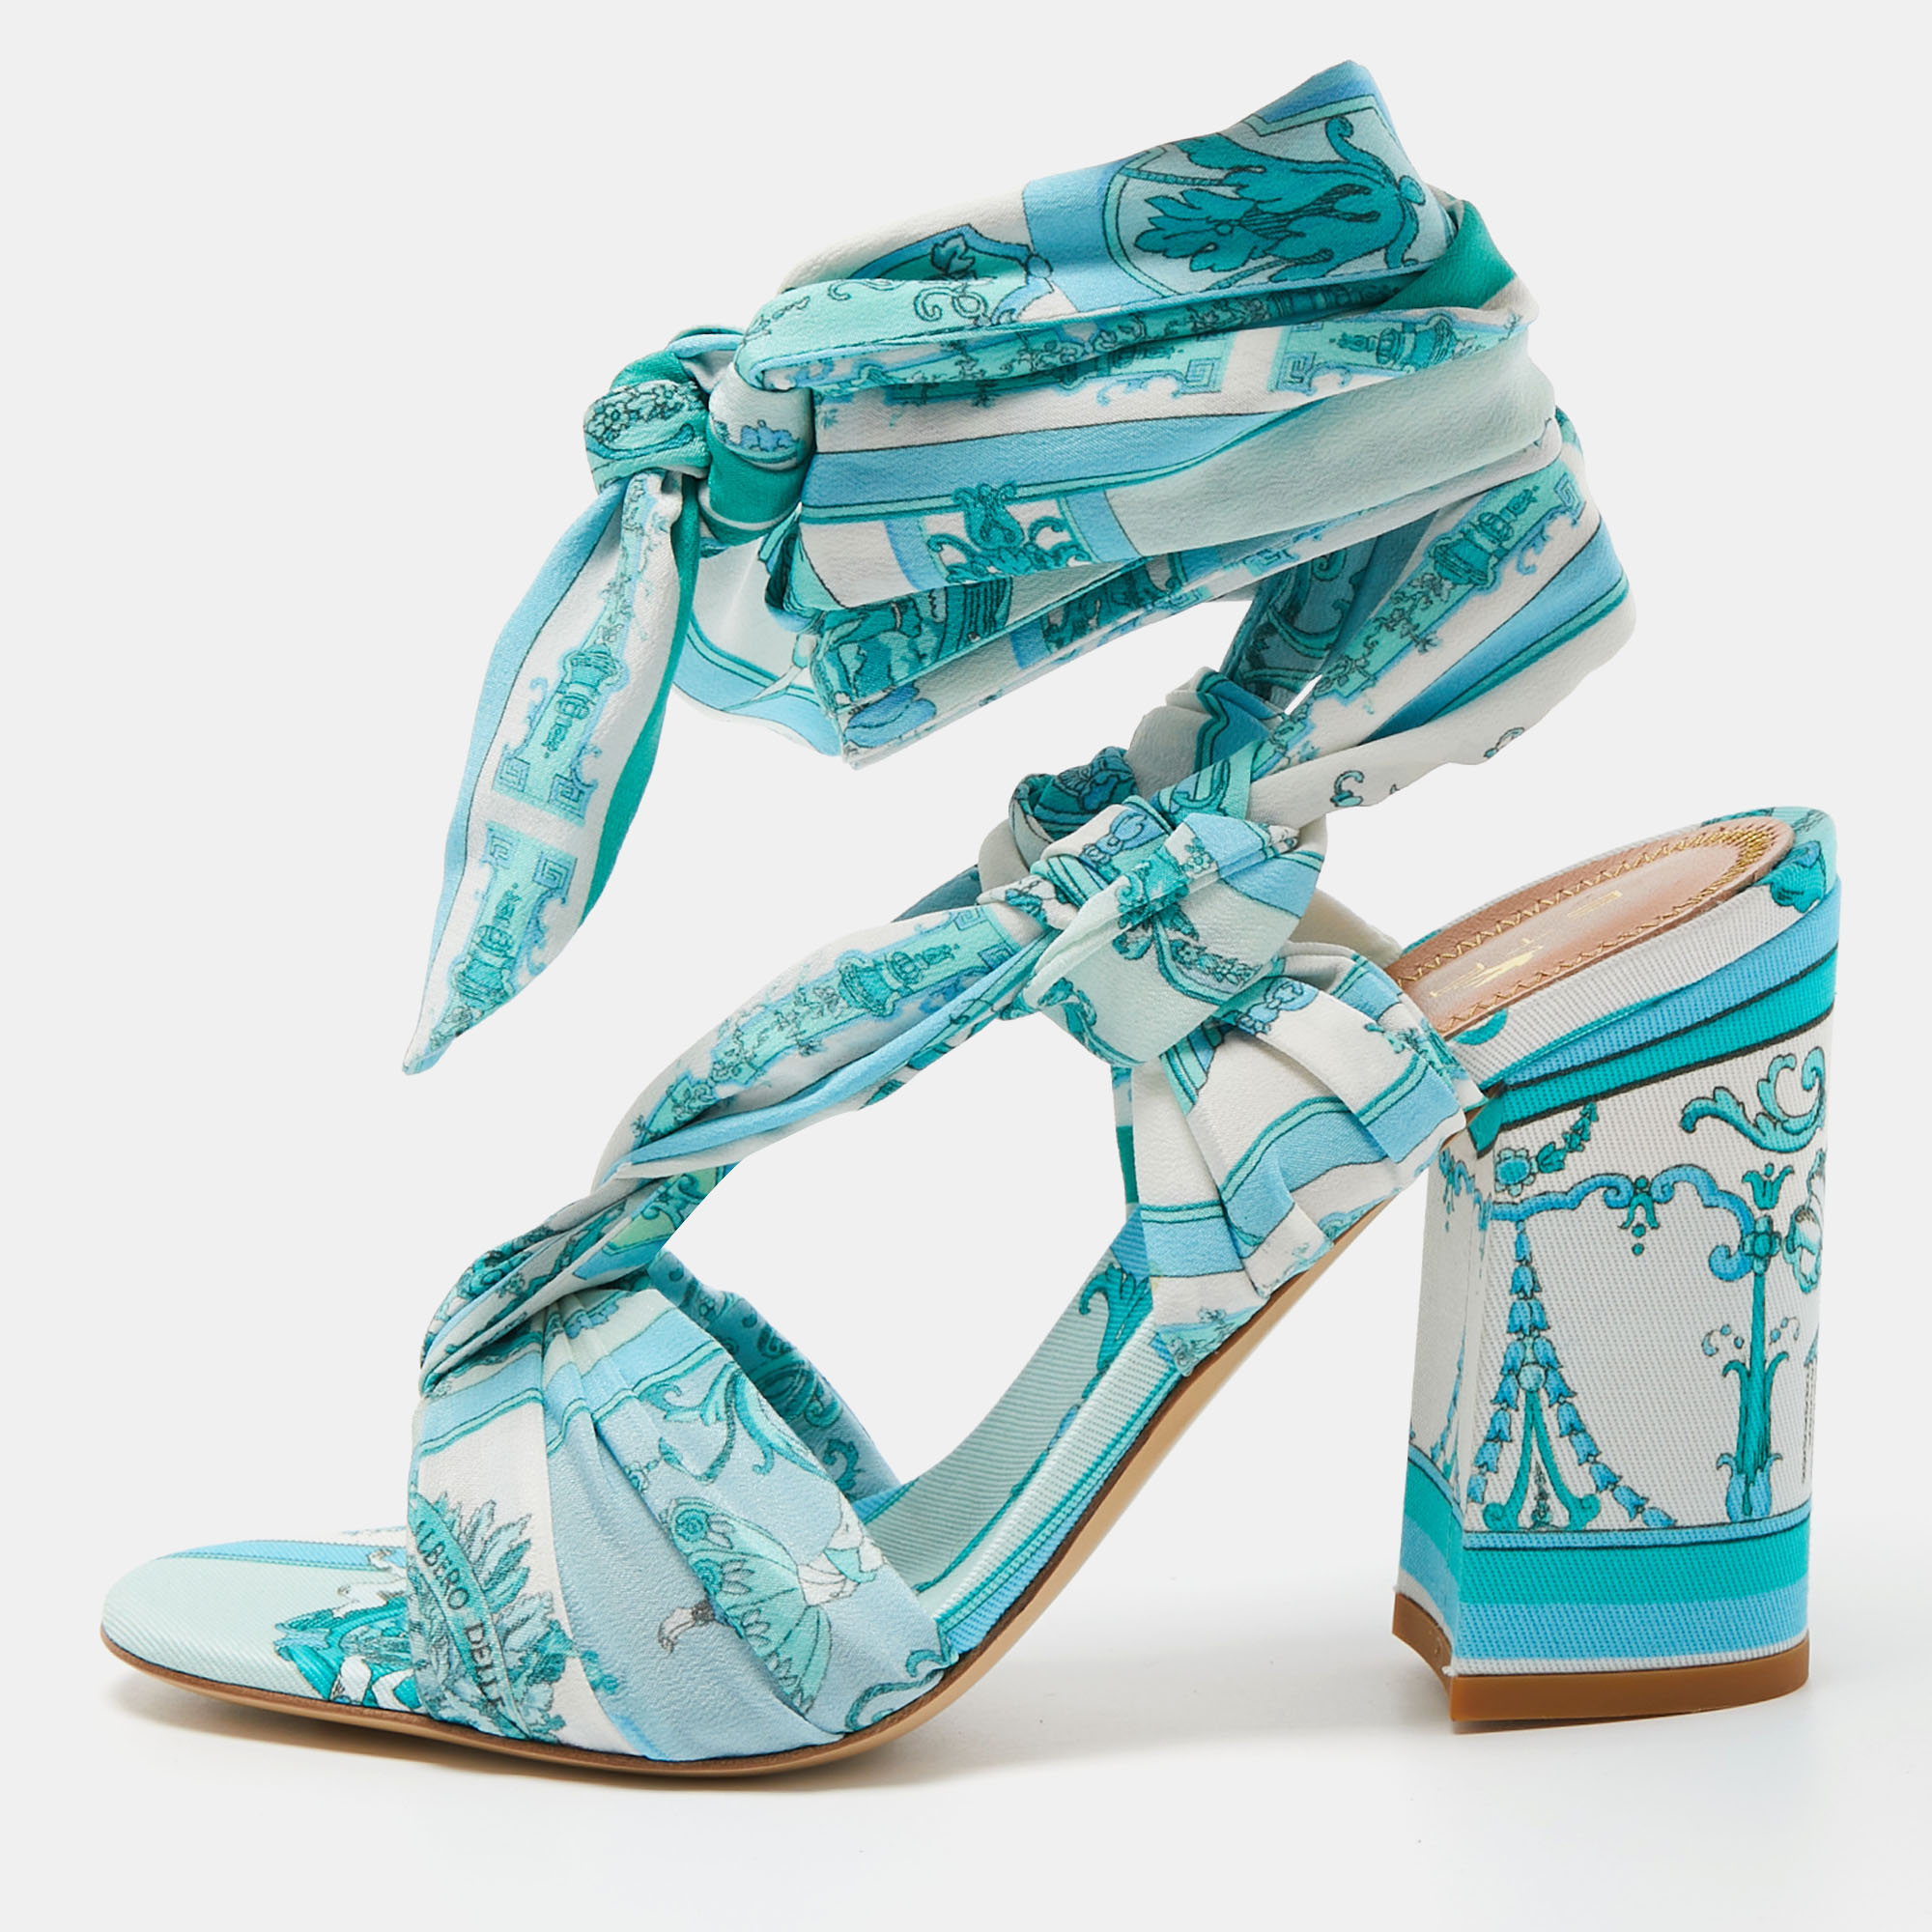 Etro Blue Ornamental Scarf Printed Fabric Block Heel Ankle Wrap Sandals Size 38